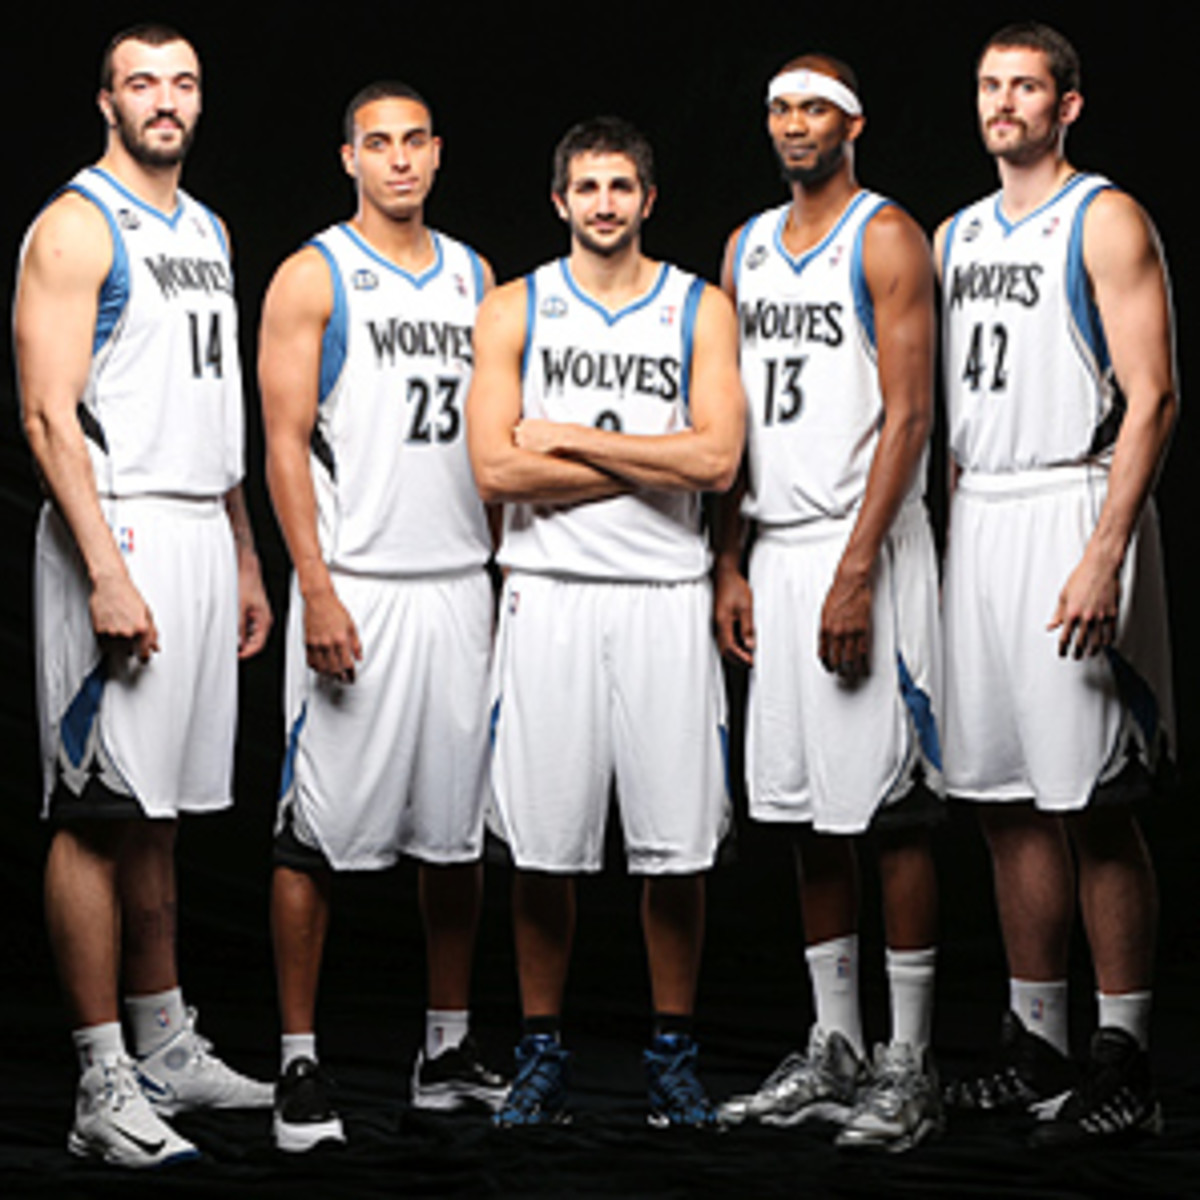 The Timberwolves have a solid starting lineup of (from left) Nikola Pekovic, Kevin Martin, Ricky Rubio, Corey Brewer and Kevin Love.